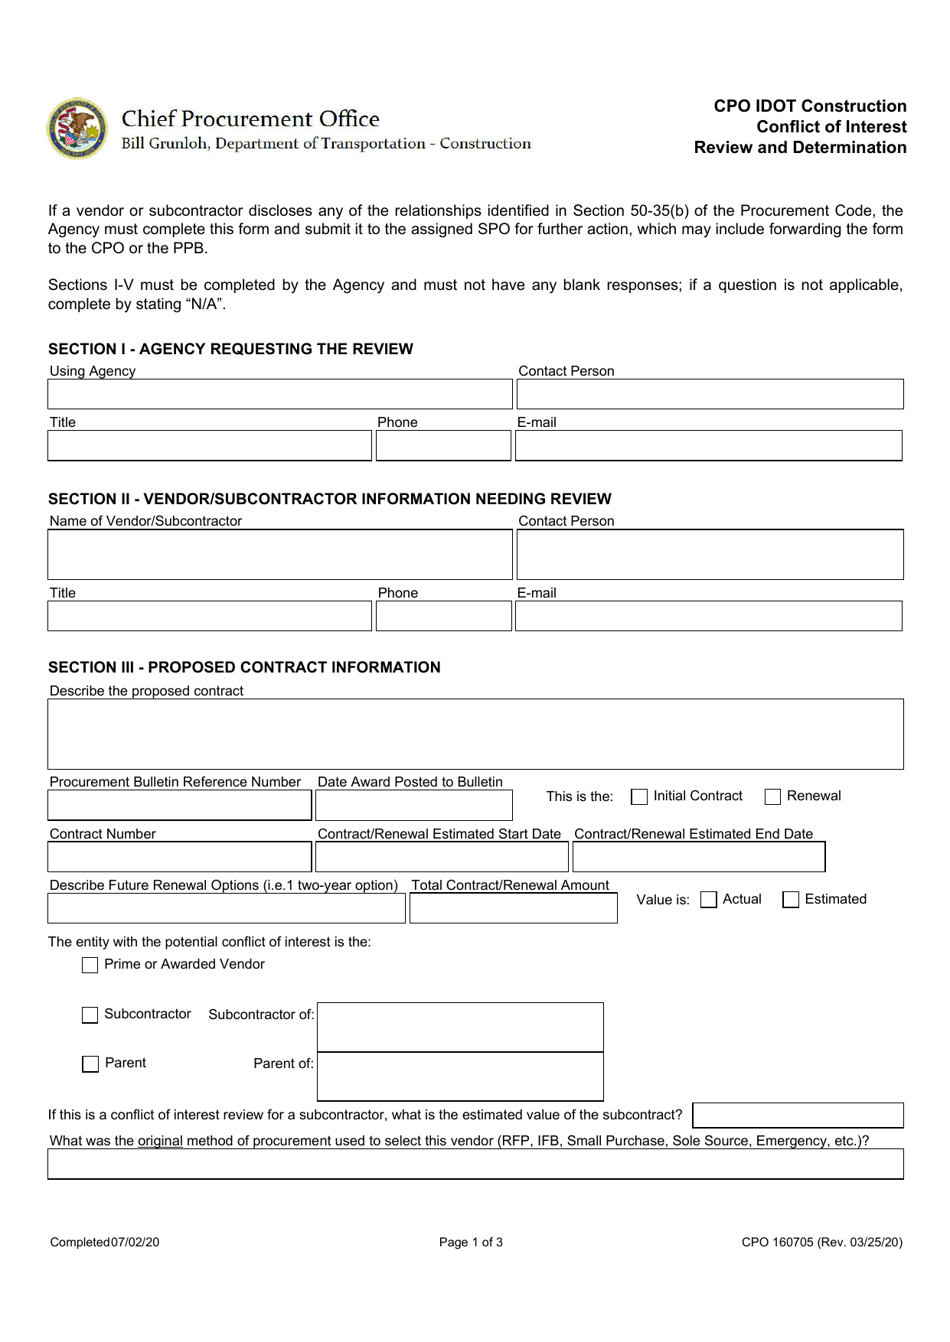 Form CPO160705 Cpo Idot Construction Conflict of Interest Review and Determination - Illinois, Page 1